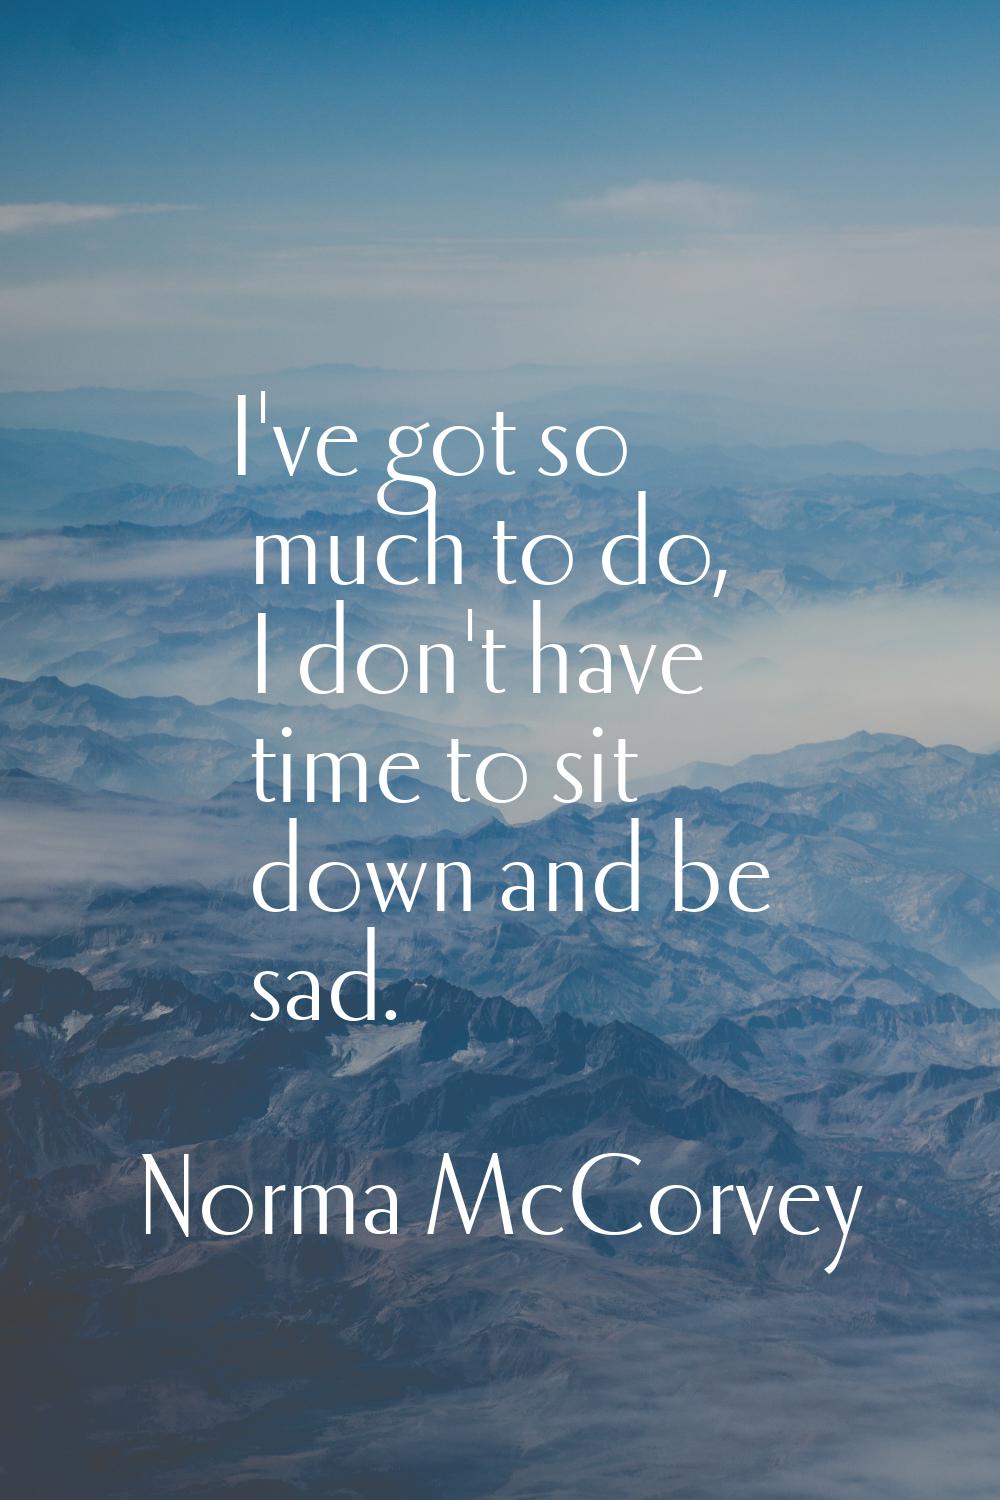 I've got so much to do, I don't have time to sit down and be sad.